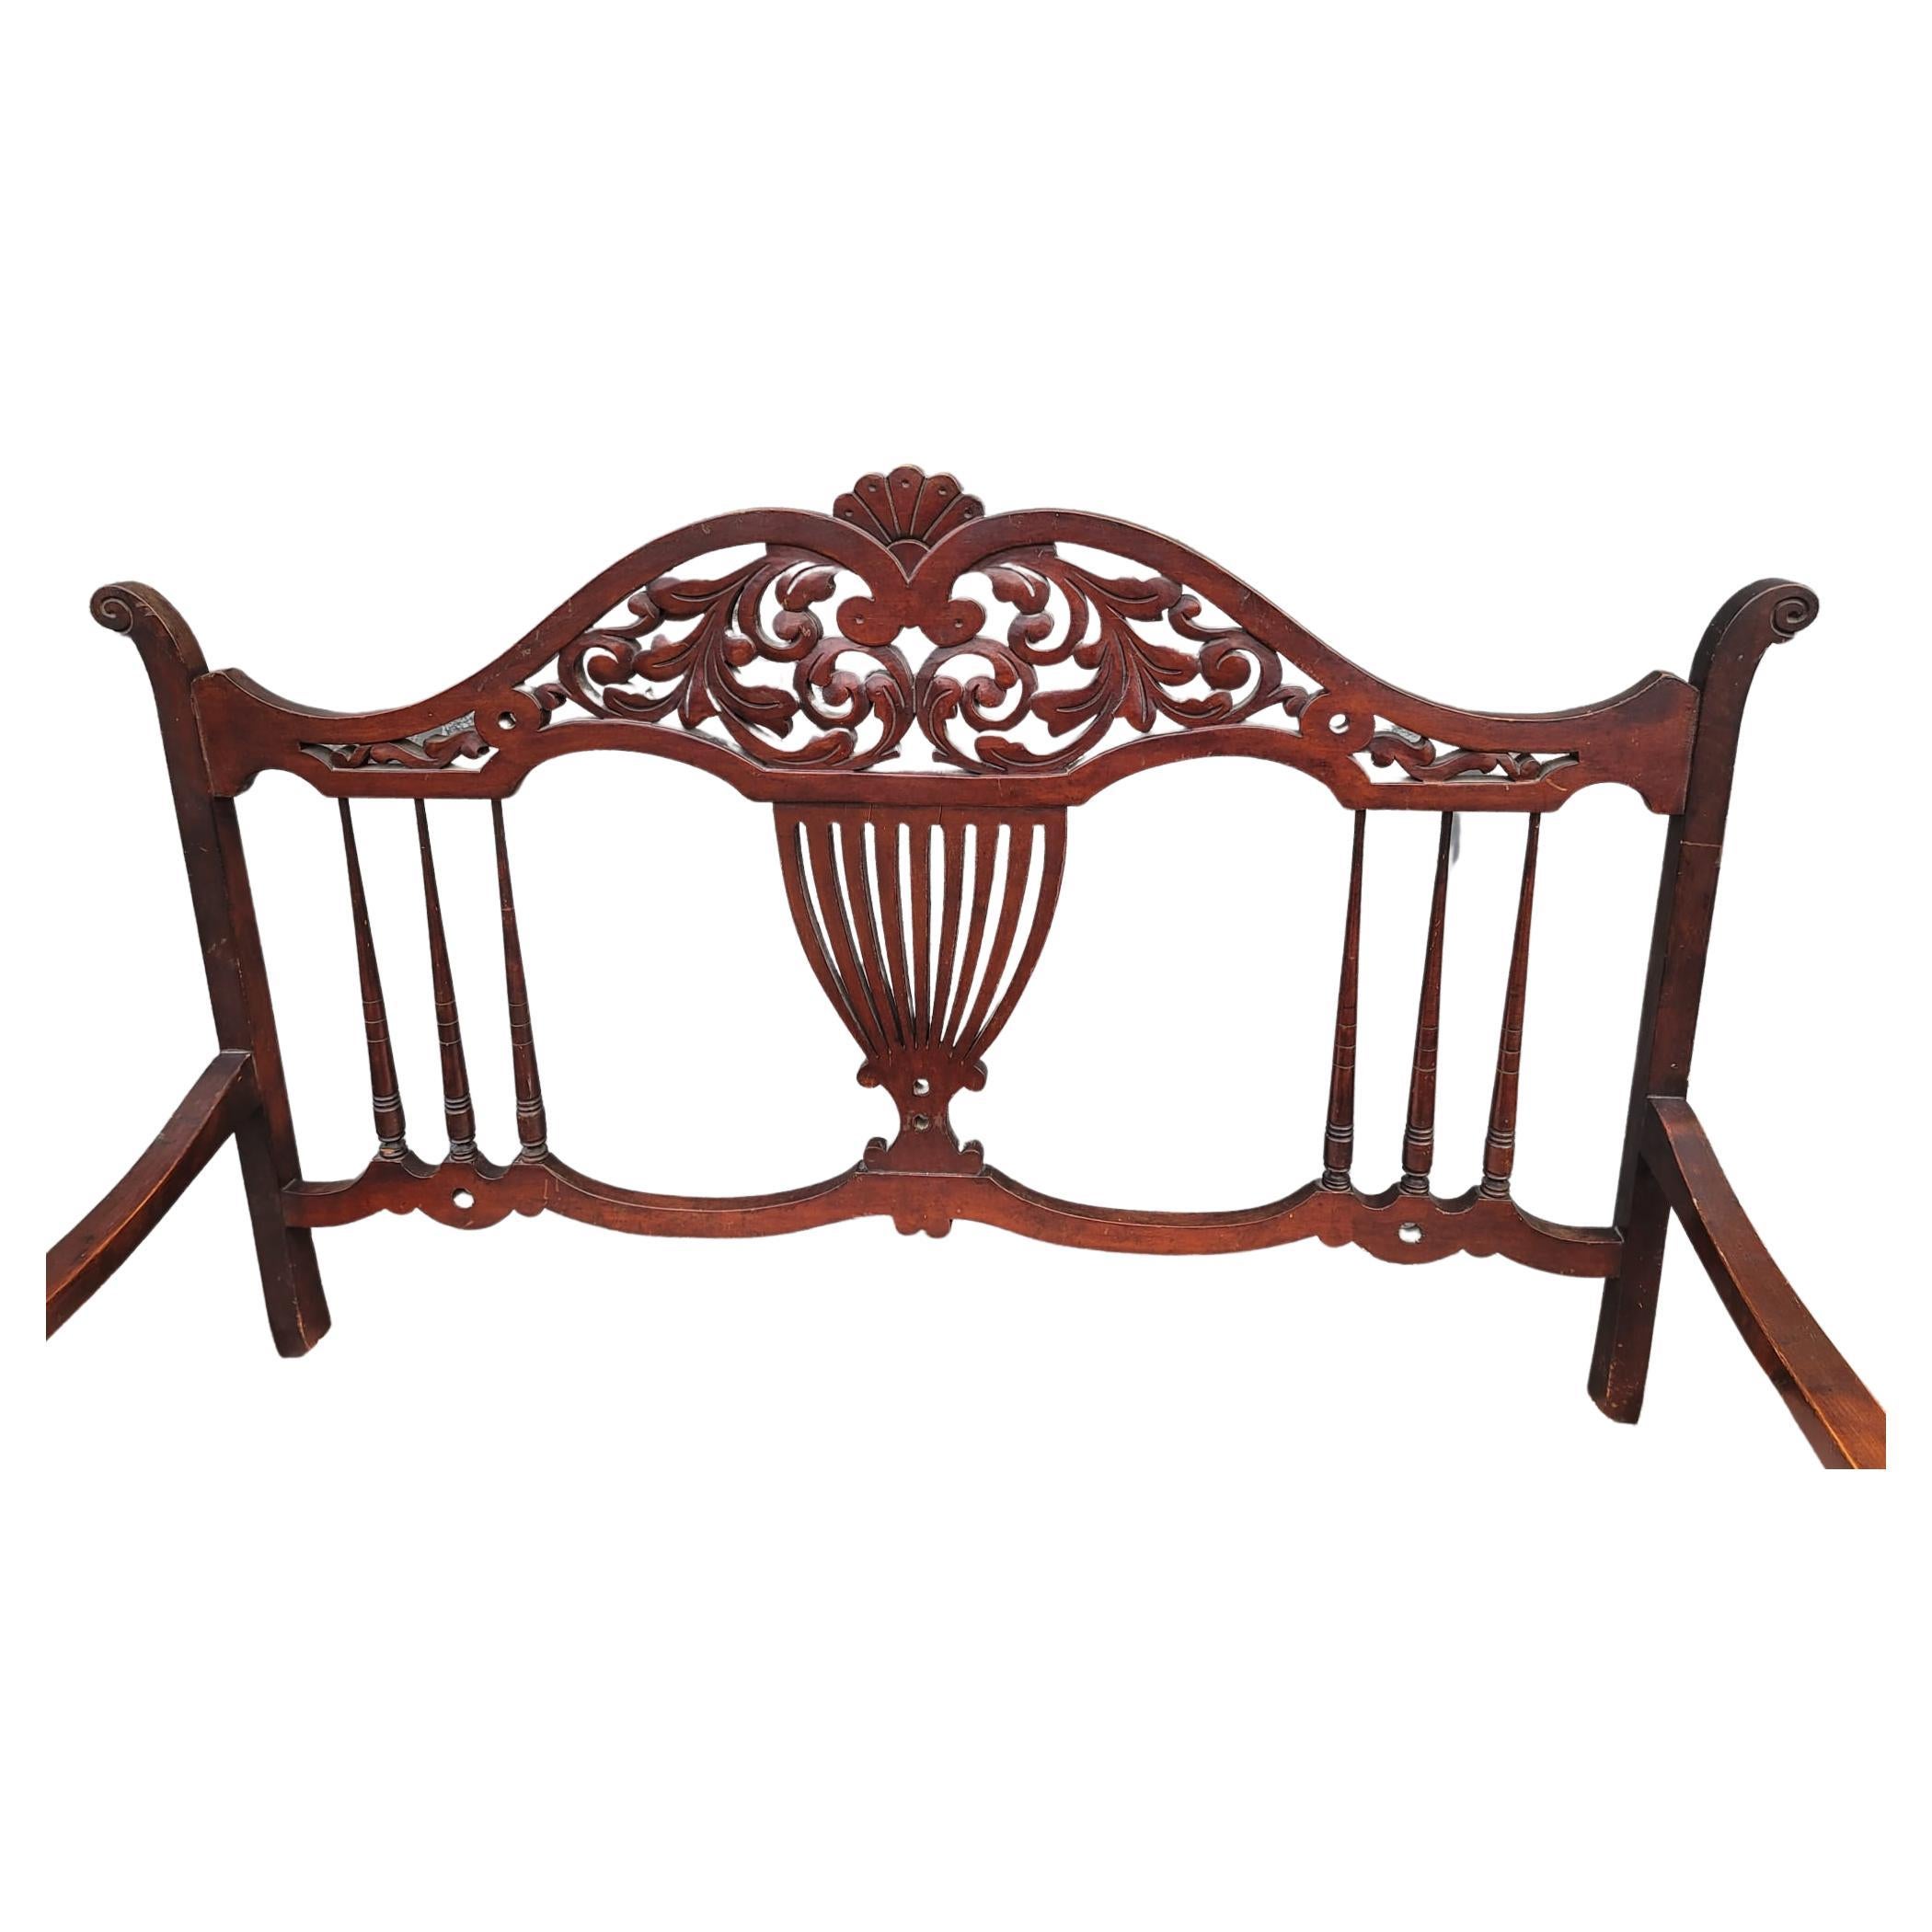 Early 20th Century Regency Carved Mahogany And Upholstered Settee In Good Condition For Sale In Germantown, MD